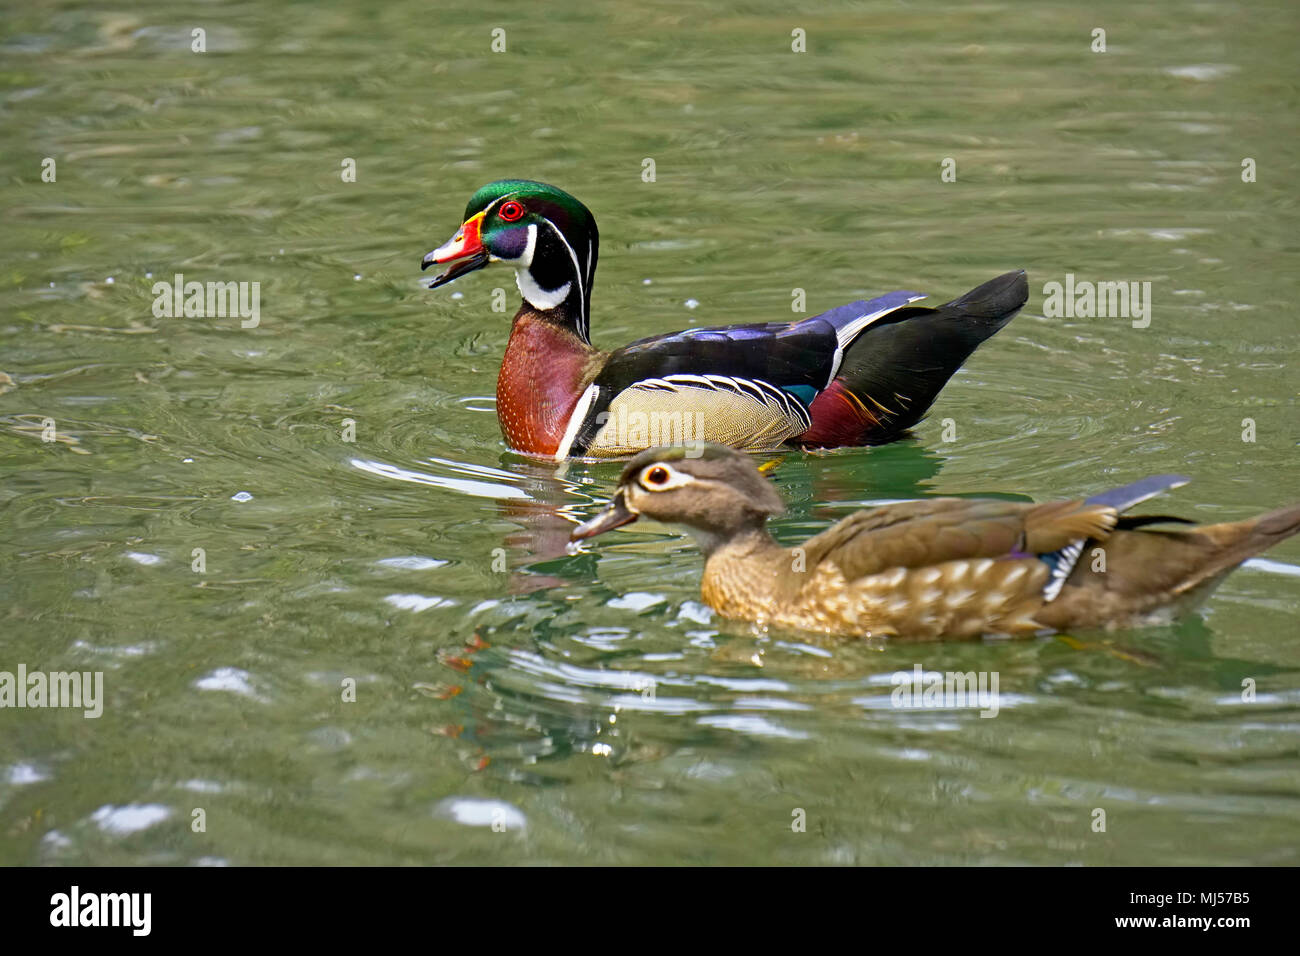 Wood ducks a breeding pair in seasonal plumage swimming on water in Toronto, Ontario, Canada in spring  Focal point on male duck Stock Photo